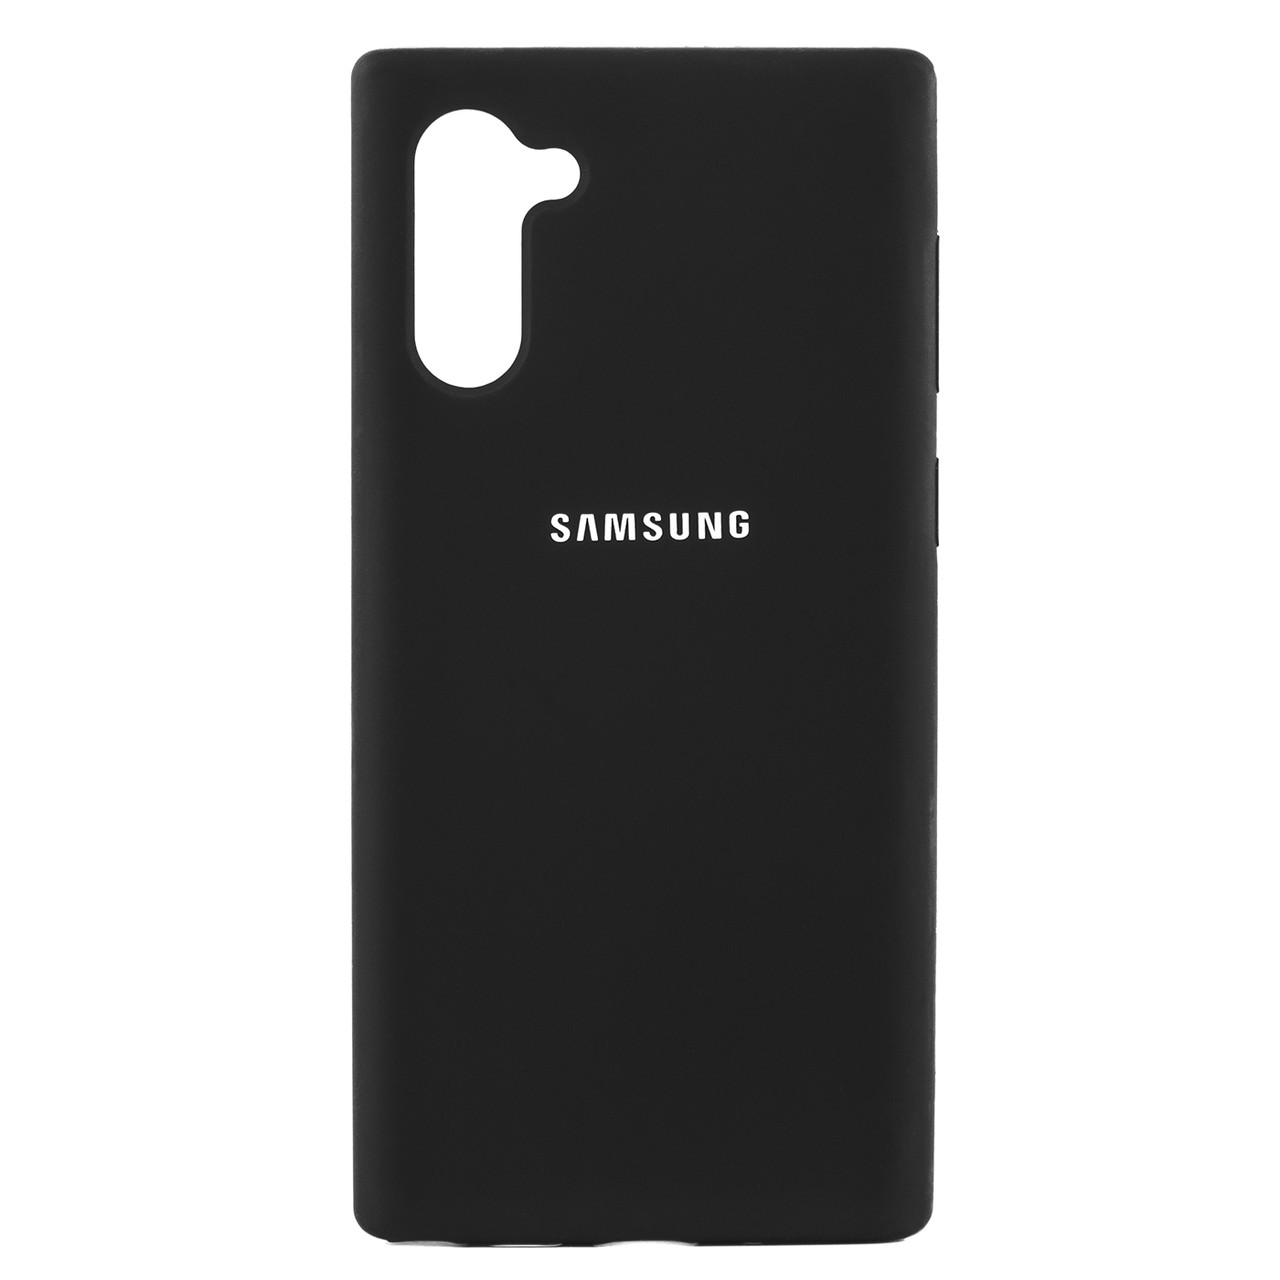 Чехол для Samsung Galaxy Note 10 back cover Silky and soft-touch Silicone Cover, Black - фото 1 - id-p115023896